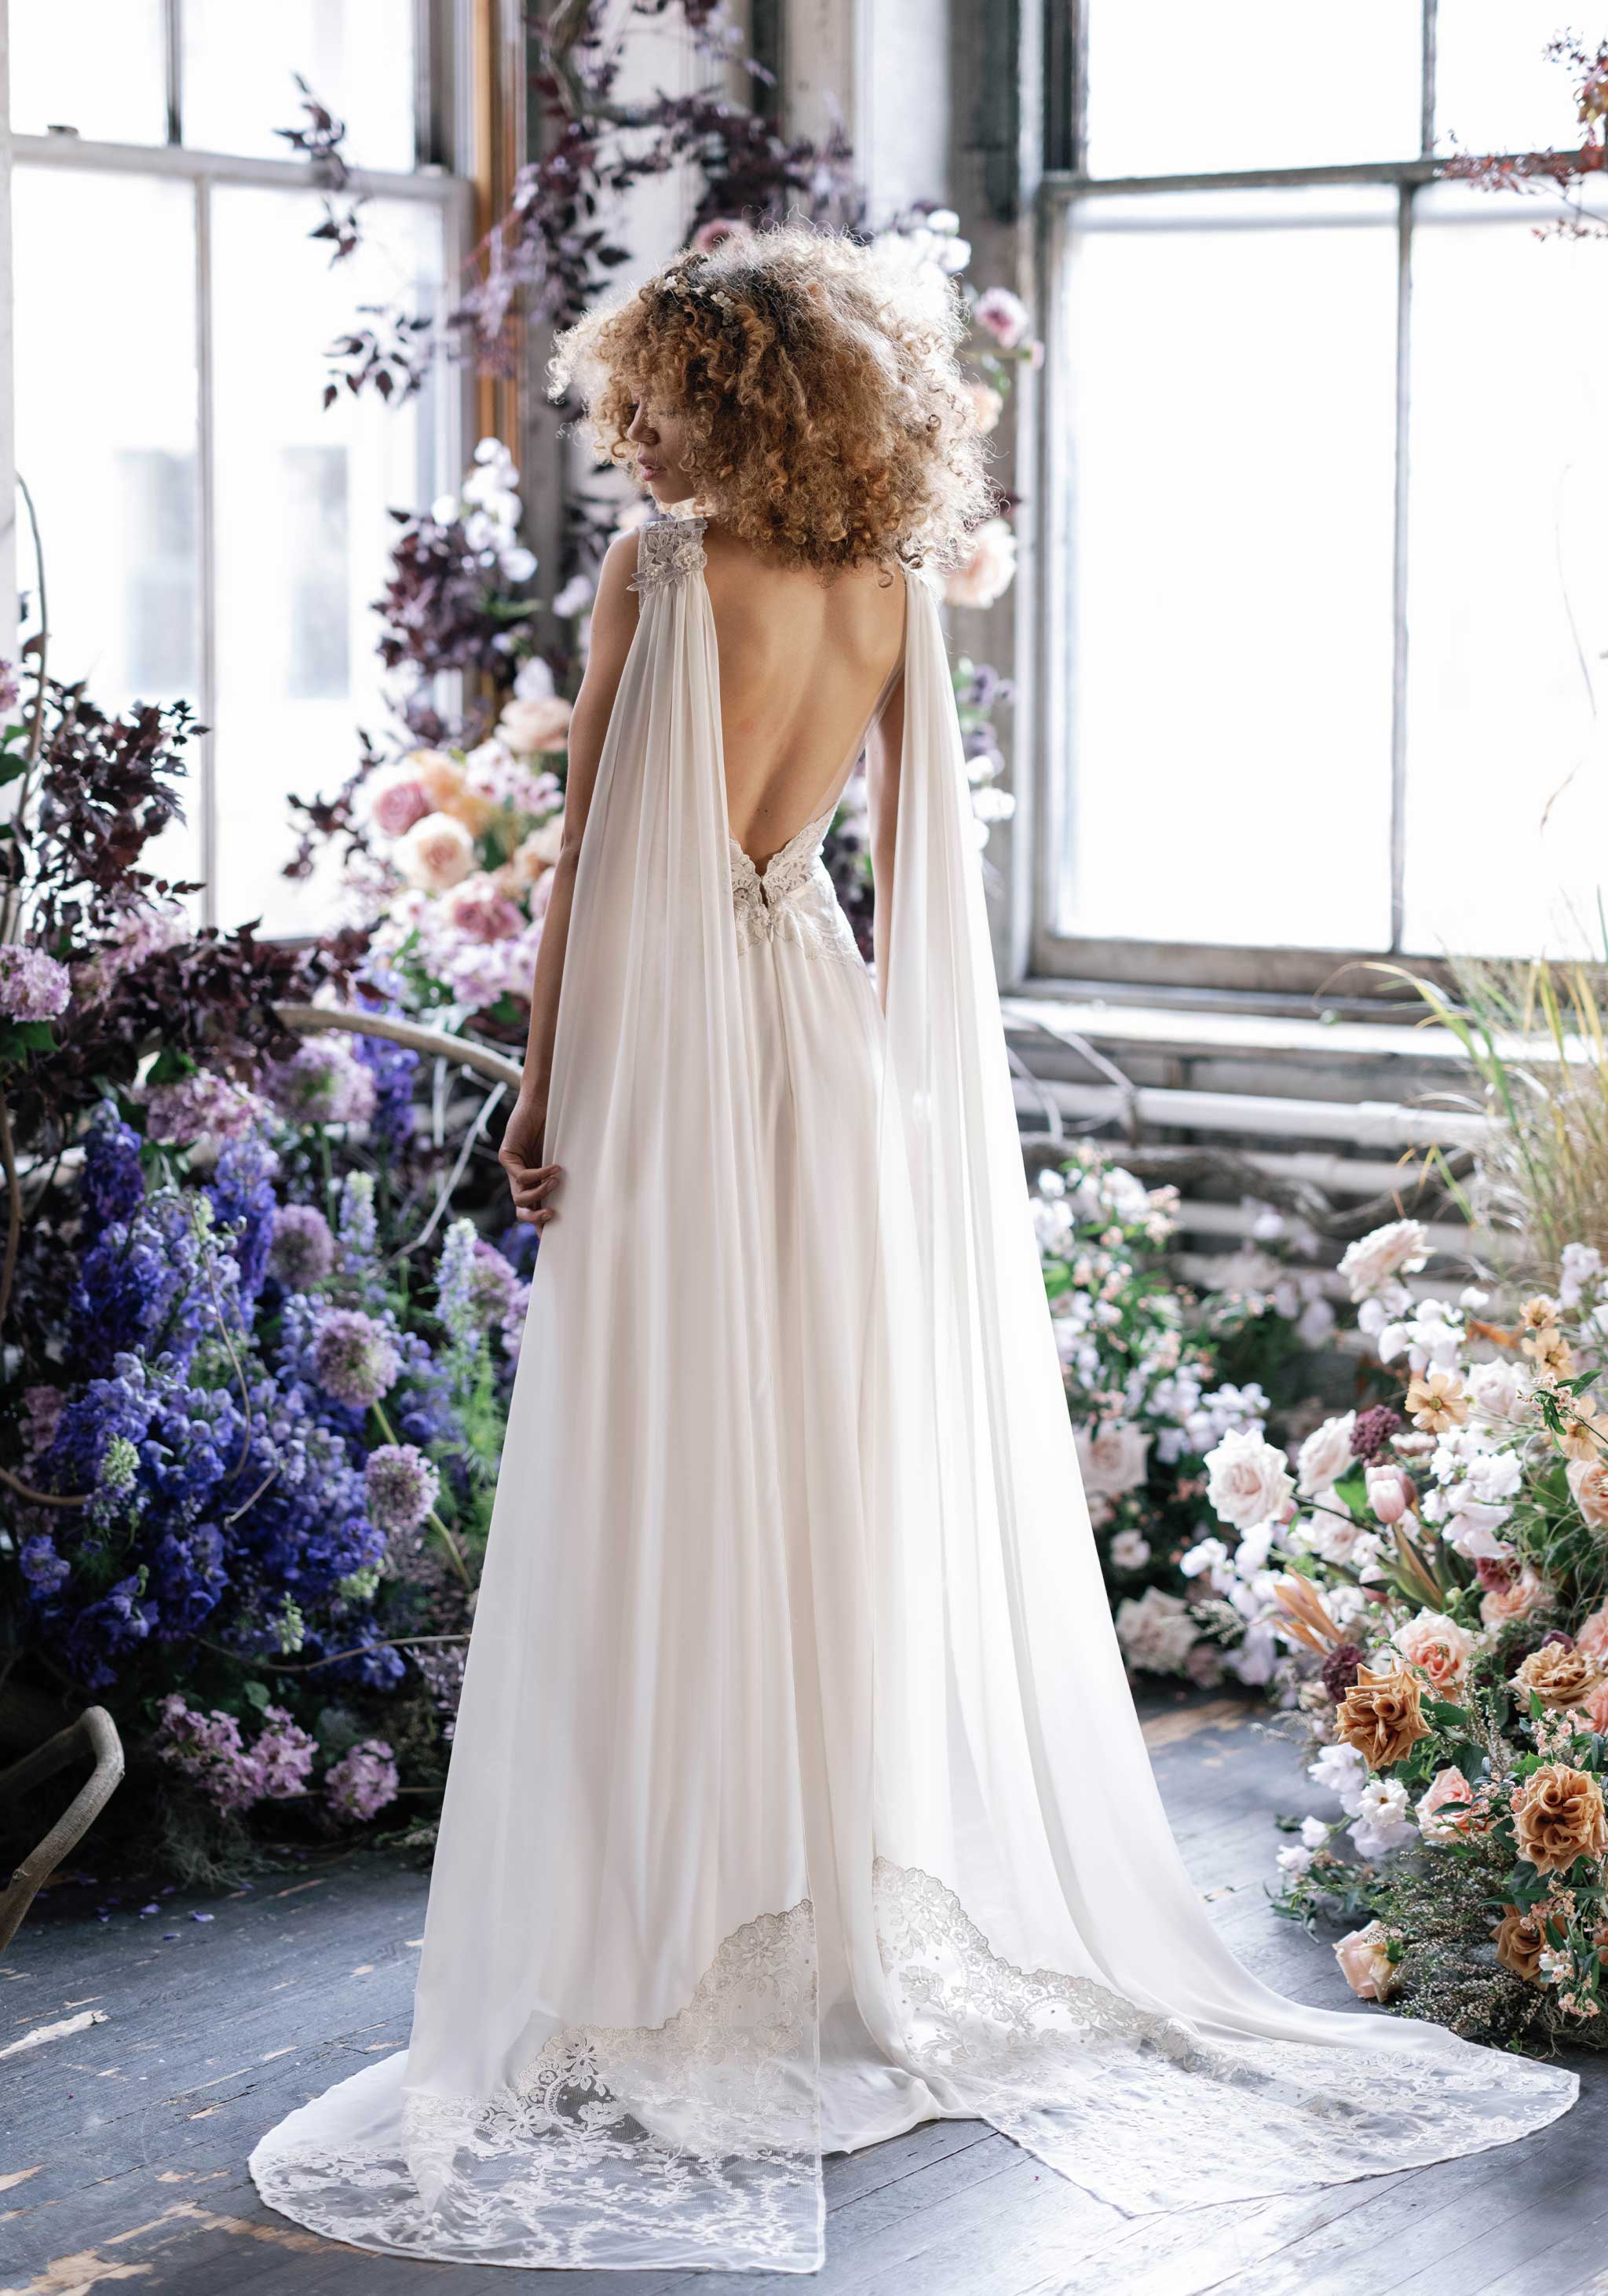 Amulet A-Line Wedding Dress with Open Back Claire Pettibone Design